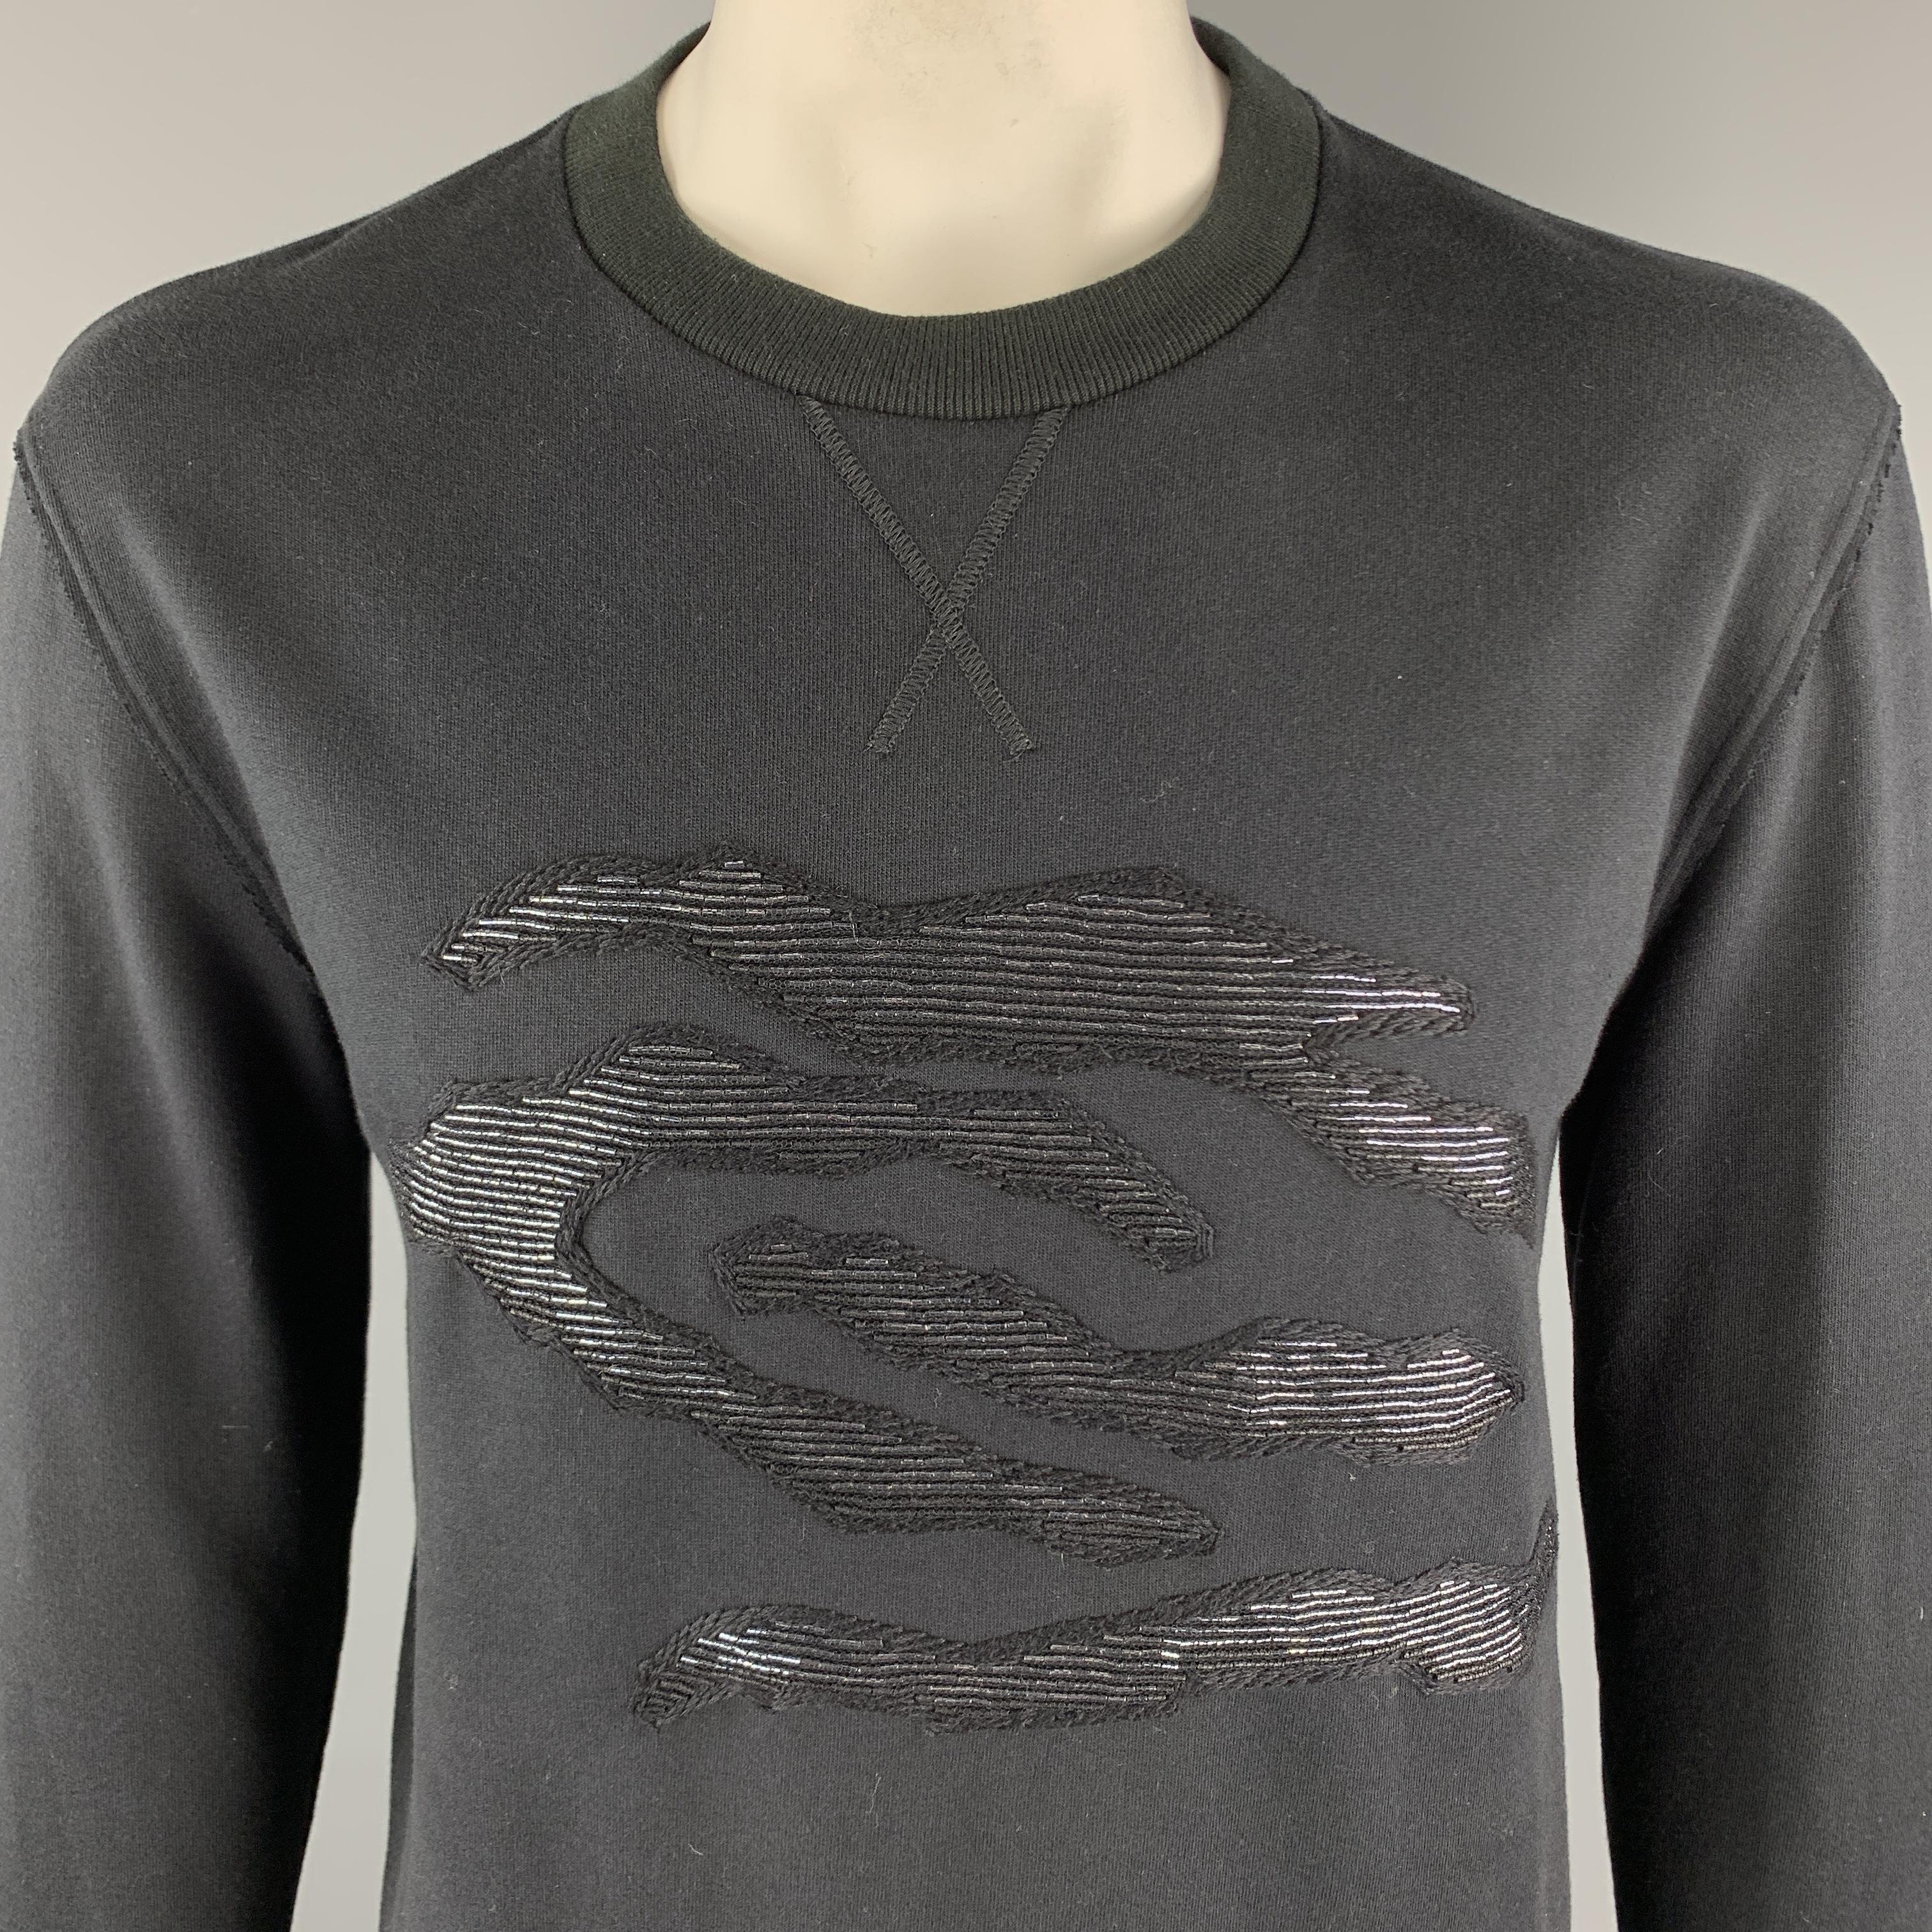 LANVIN Sweatshirt comes in a black tone in a solid cotton material, with a crewneck, a beaded embellishment at front, and ribbed cuffs and hem. Made in Italy.

Excellent Pre-Owned Condition.
Marked: M

Measurements:

Shoulder: 18 in.
Chest: 44 in.